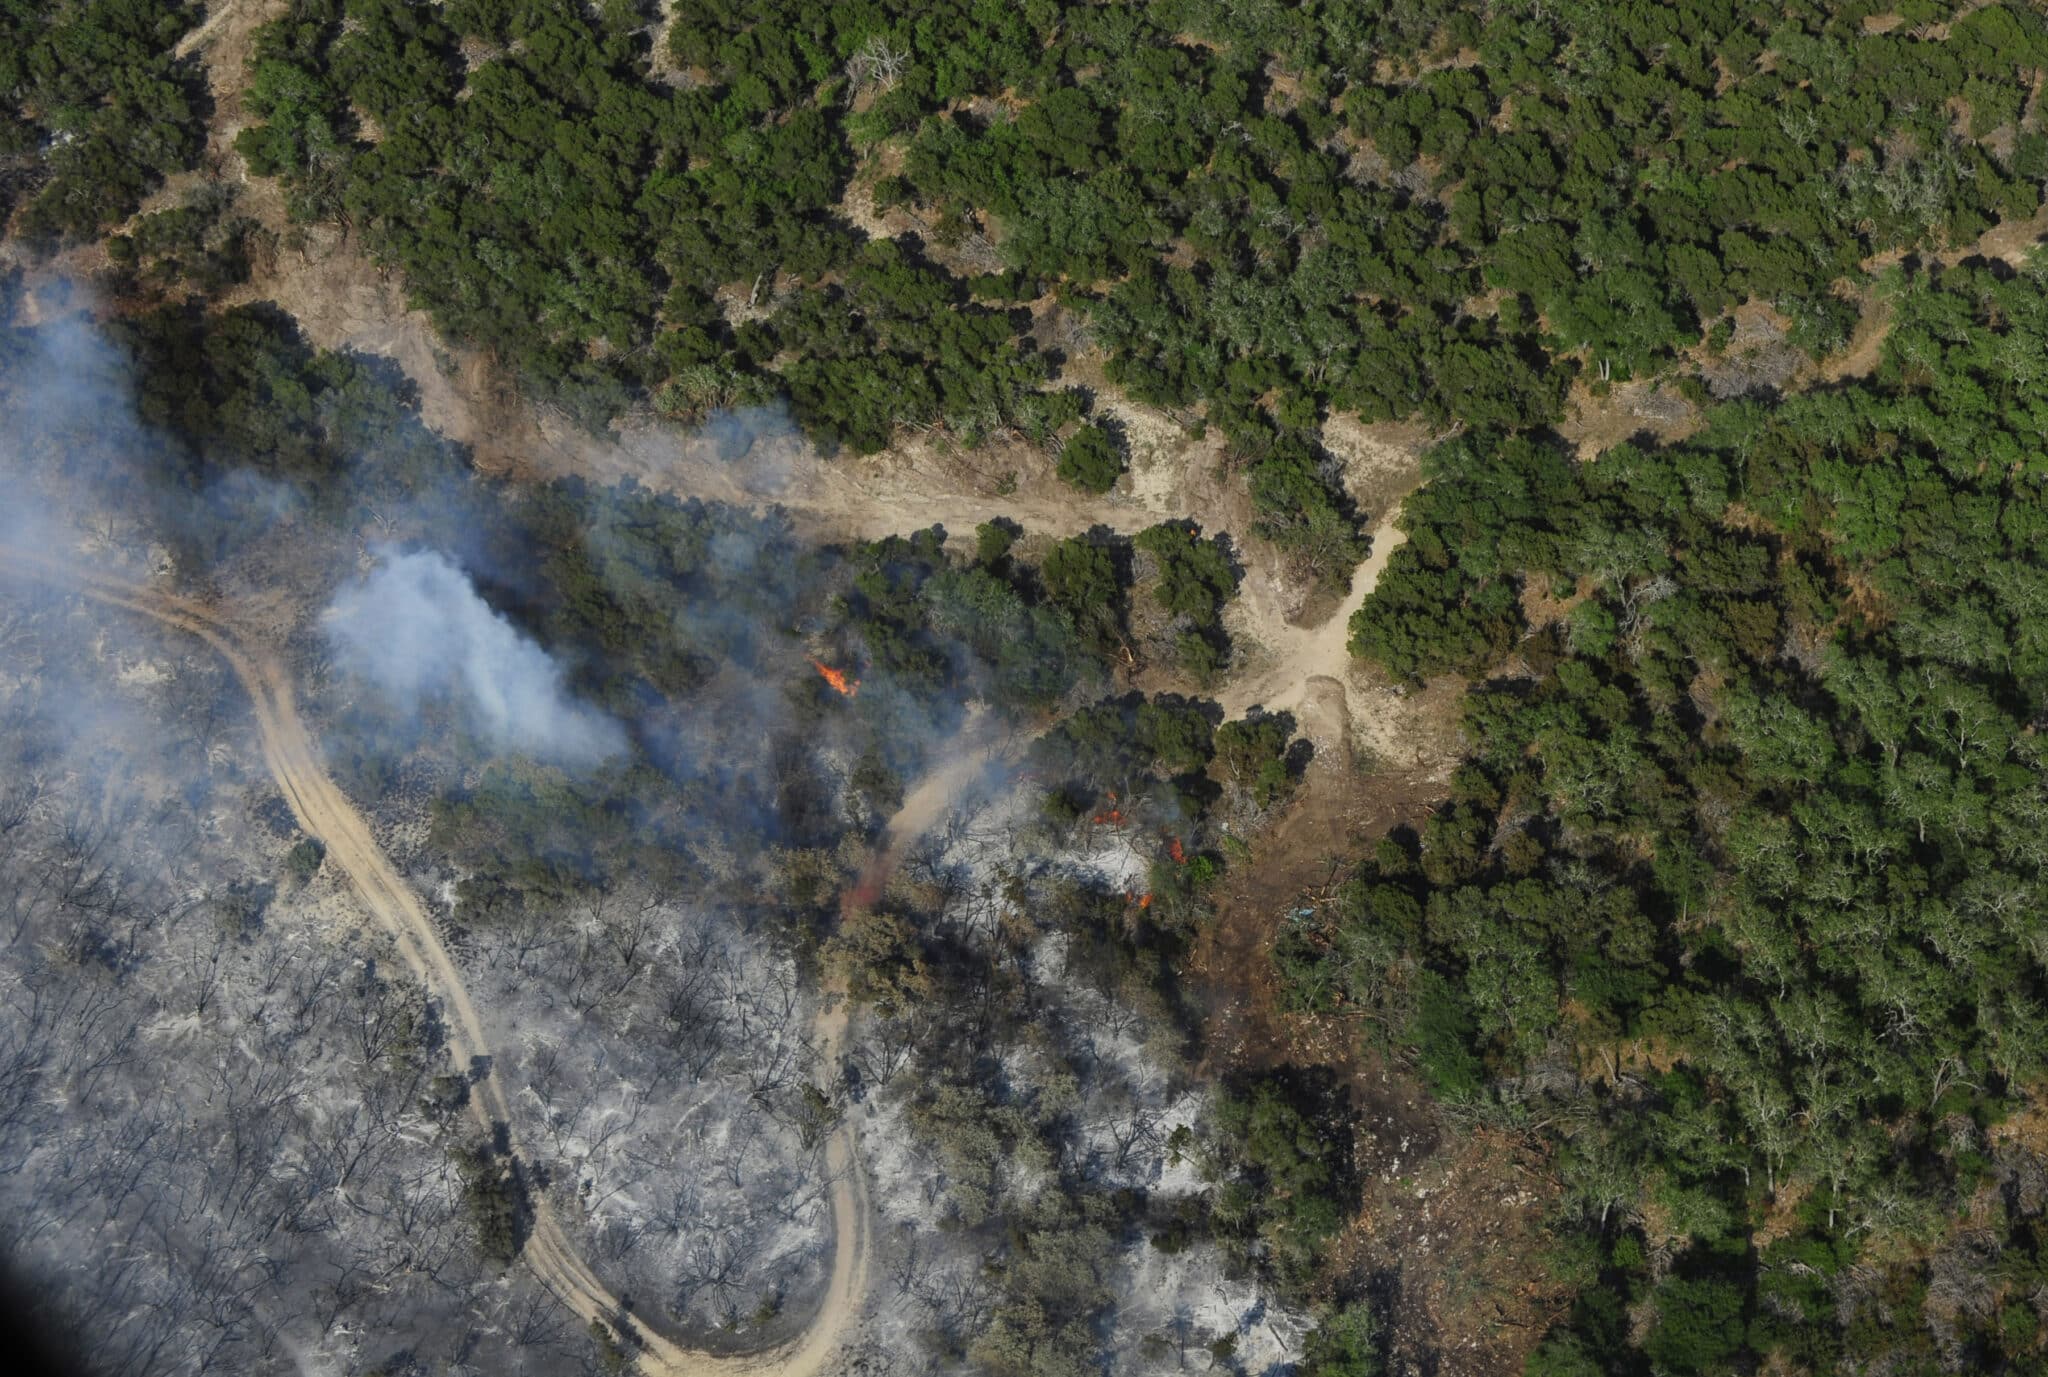 A Wildfire clears a swath of forest with the lower left half of the image razed to the ground.